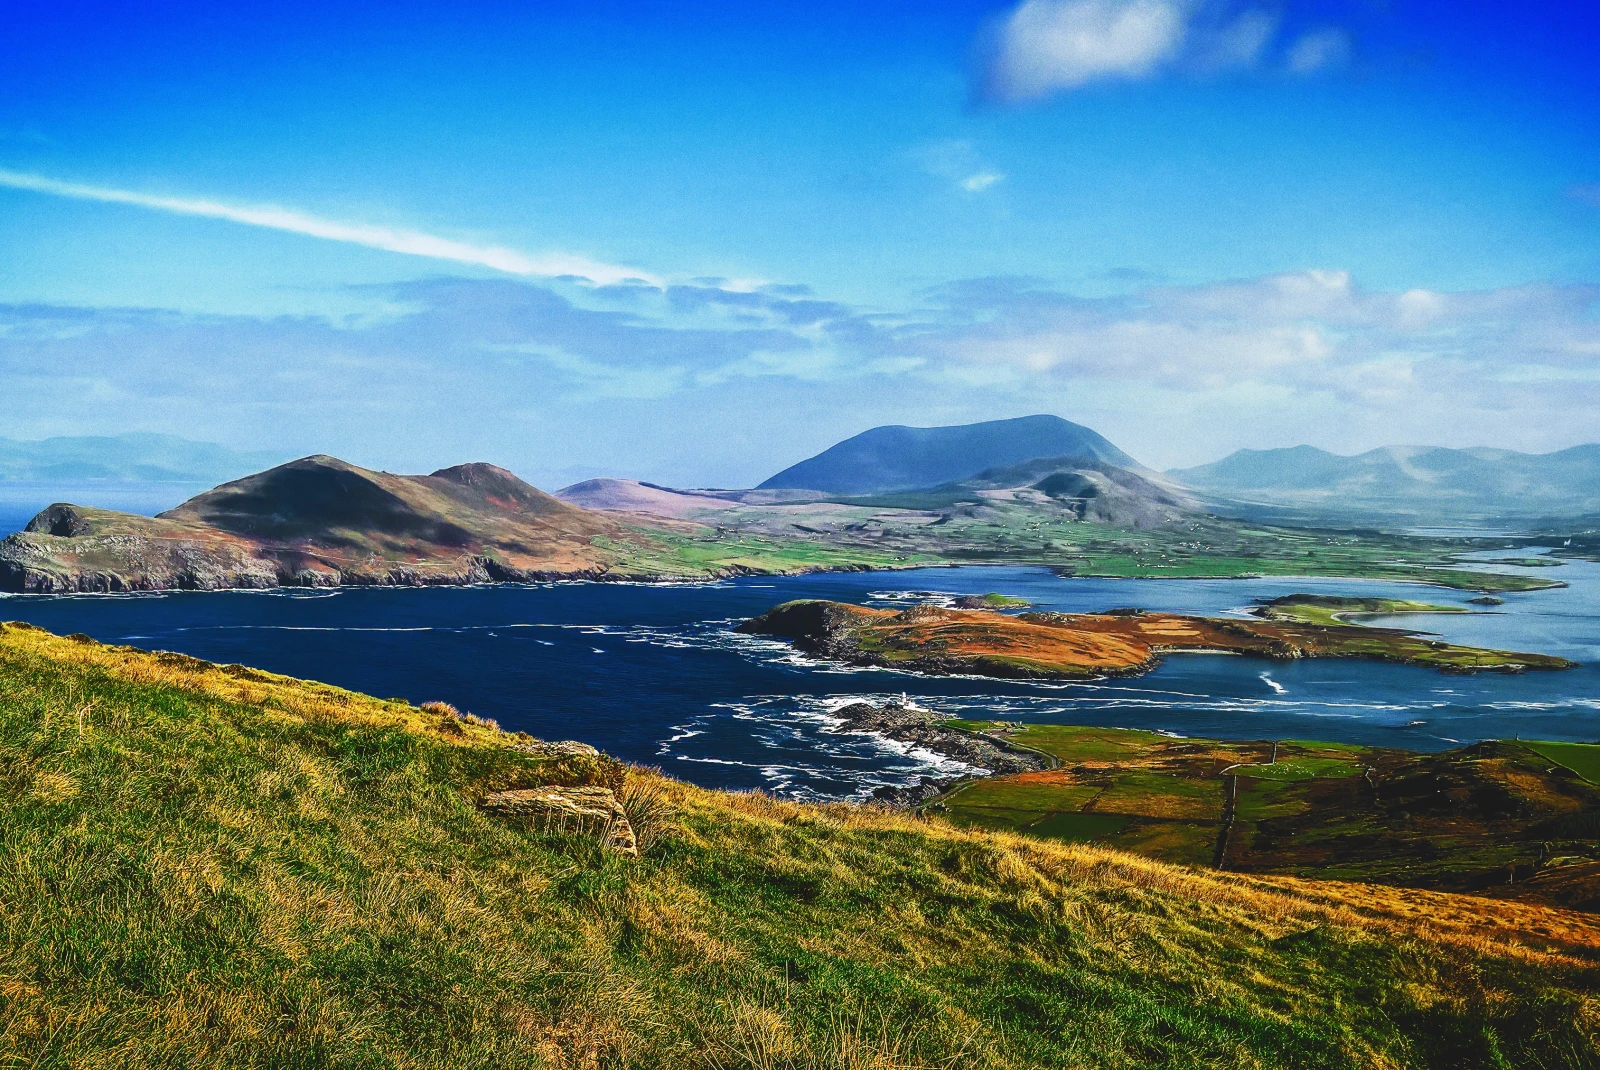 Panoramic views of hills in Ireland and water. 